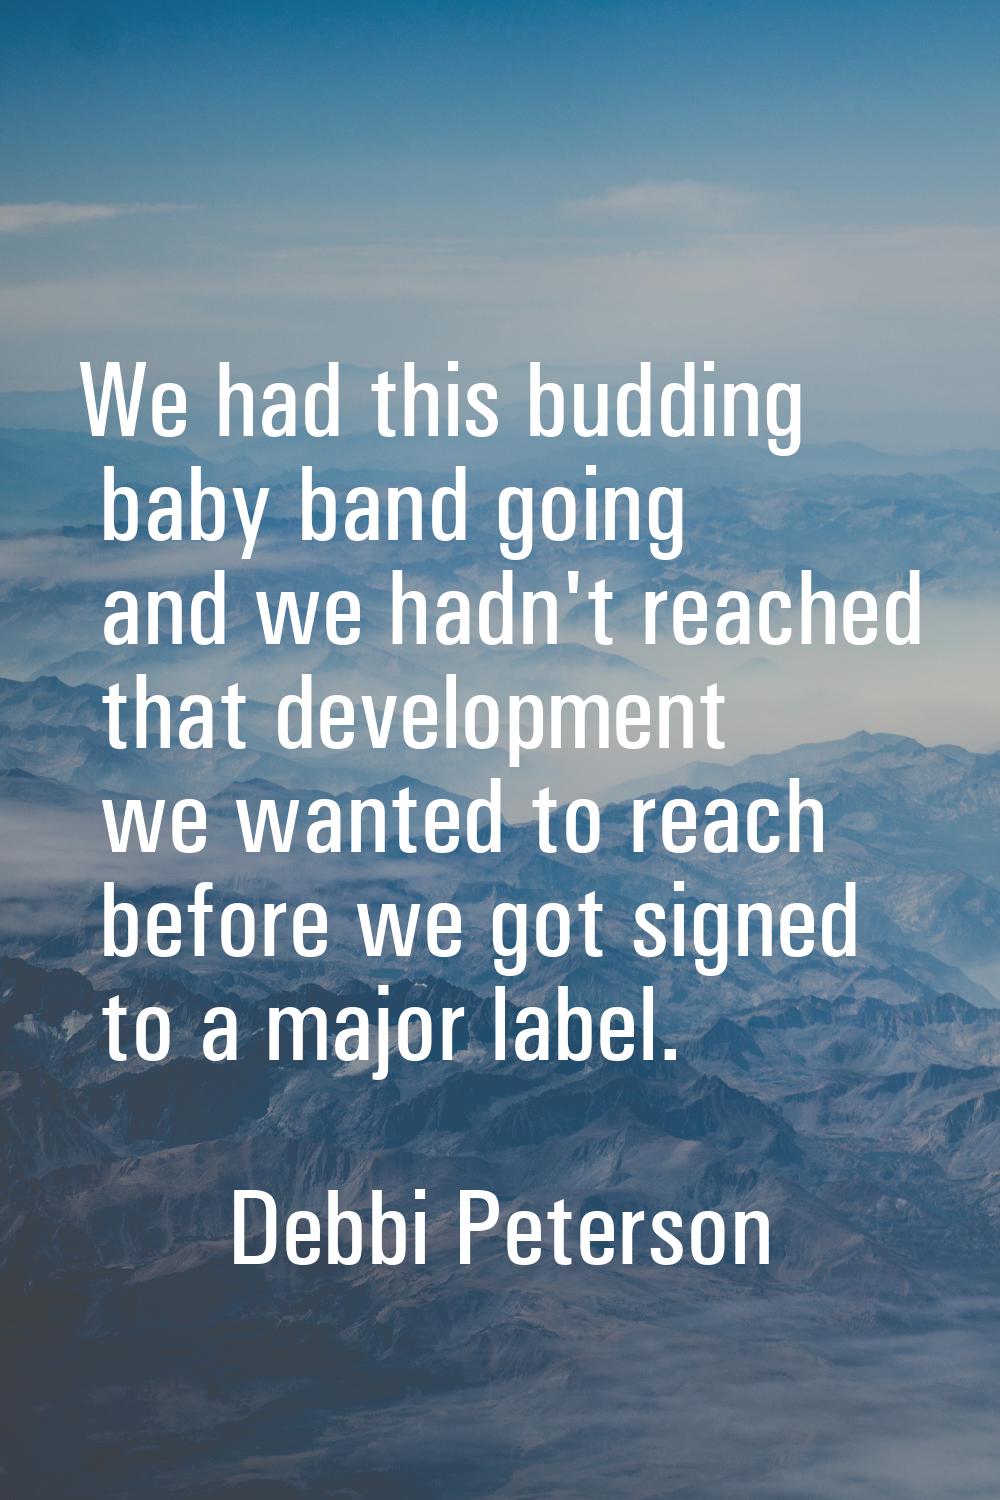 We had this budding baby band going and we hadn't reached that development we wanted to reach befor